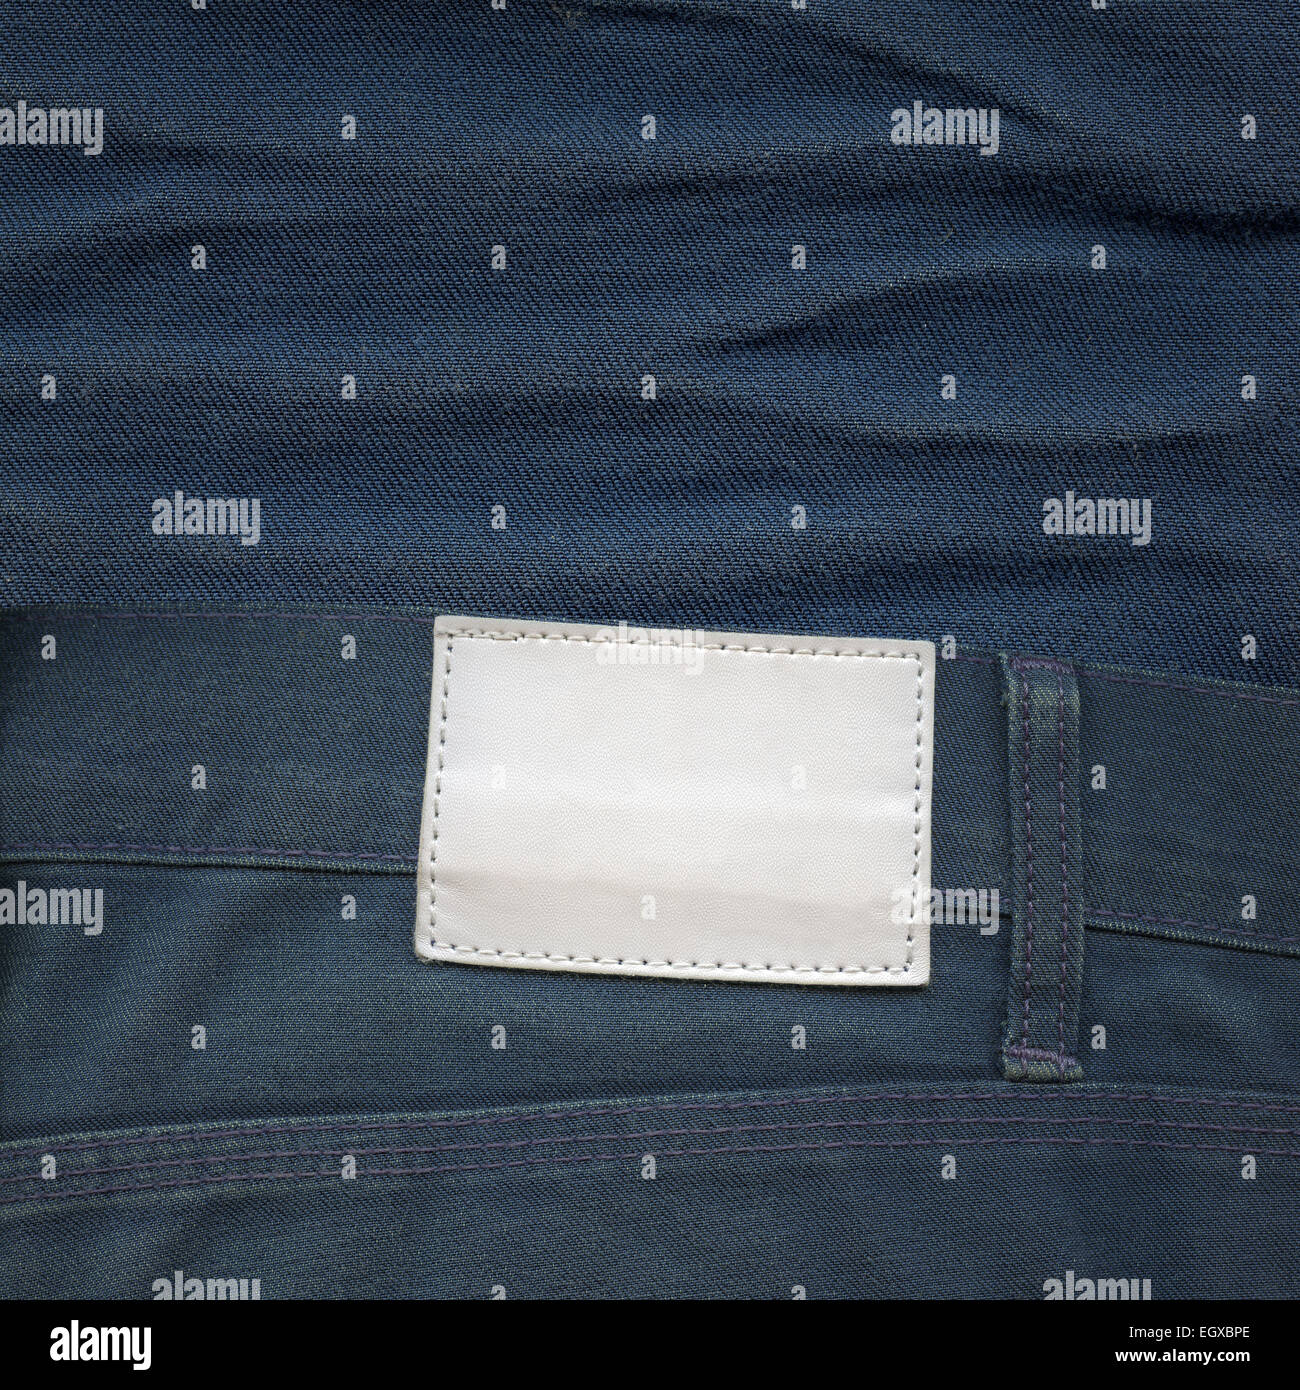 Blank leather label on jeans Stock Photo - Alamy